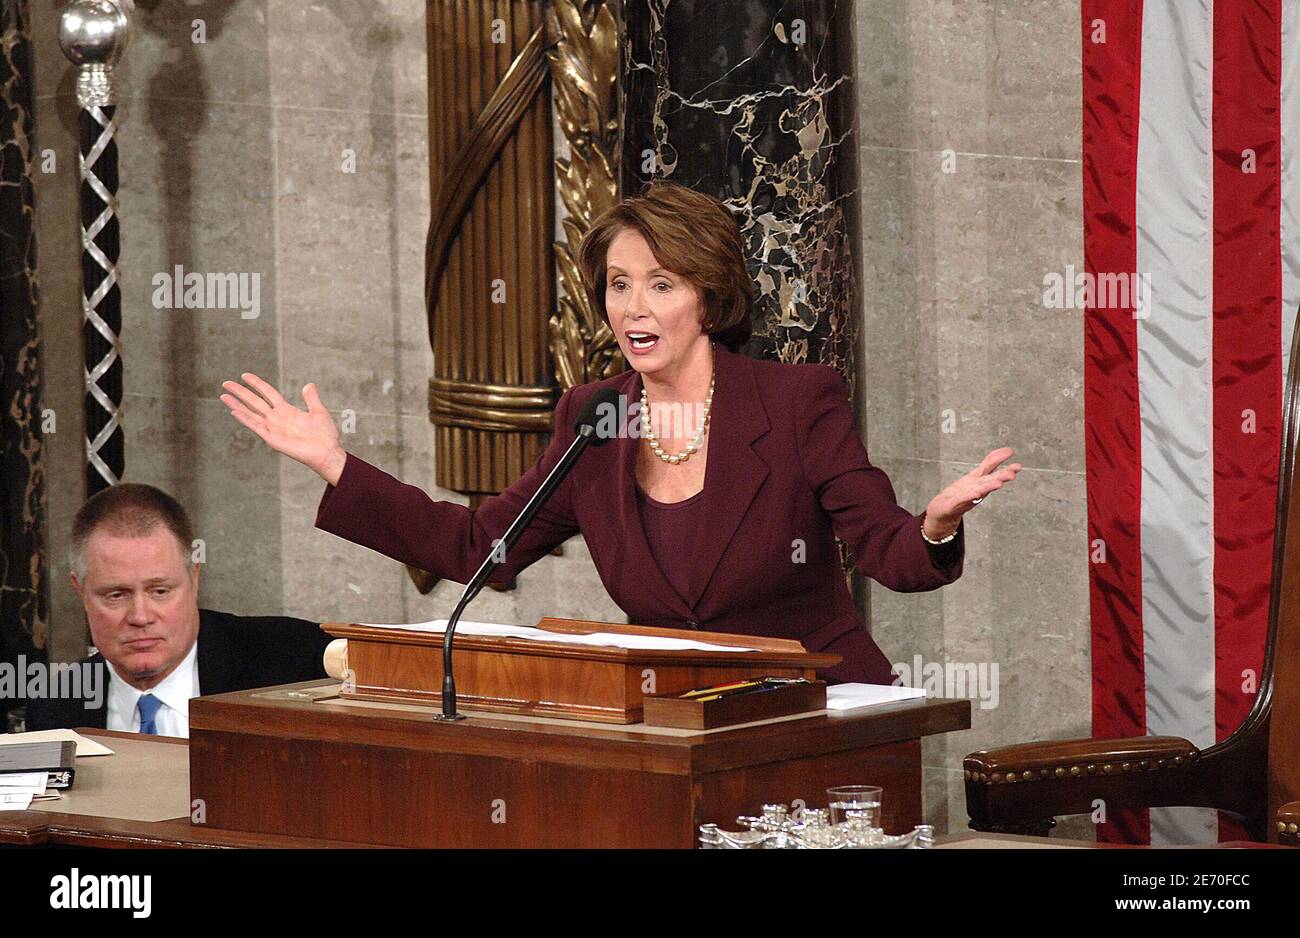 Speaker of the House Nancy Pelosi (D-CA) speaks after being elected as the first woman Speaker during a swearing in ceremony for the 110th Congress in the House Chamber of the U.S. Capitol, on January 4, 2007 in Washington, DC, USA. Pelosi will lead House Democrats as the Democratic Party takes control of both houses of Congress. Photo by Olivier Douliery/ABACAPRESS.COM Stock Photo